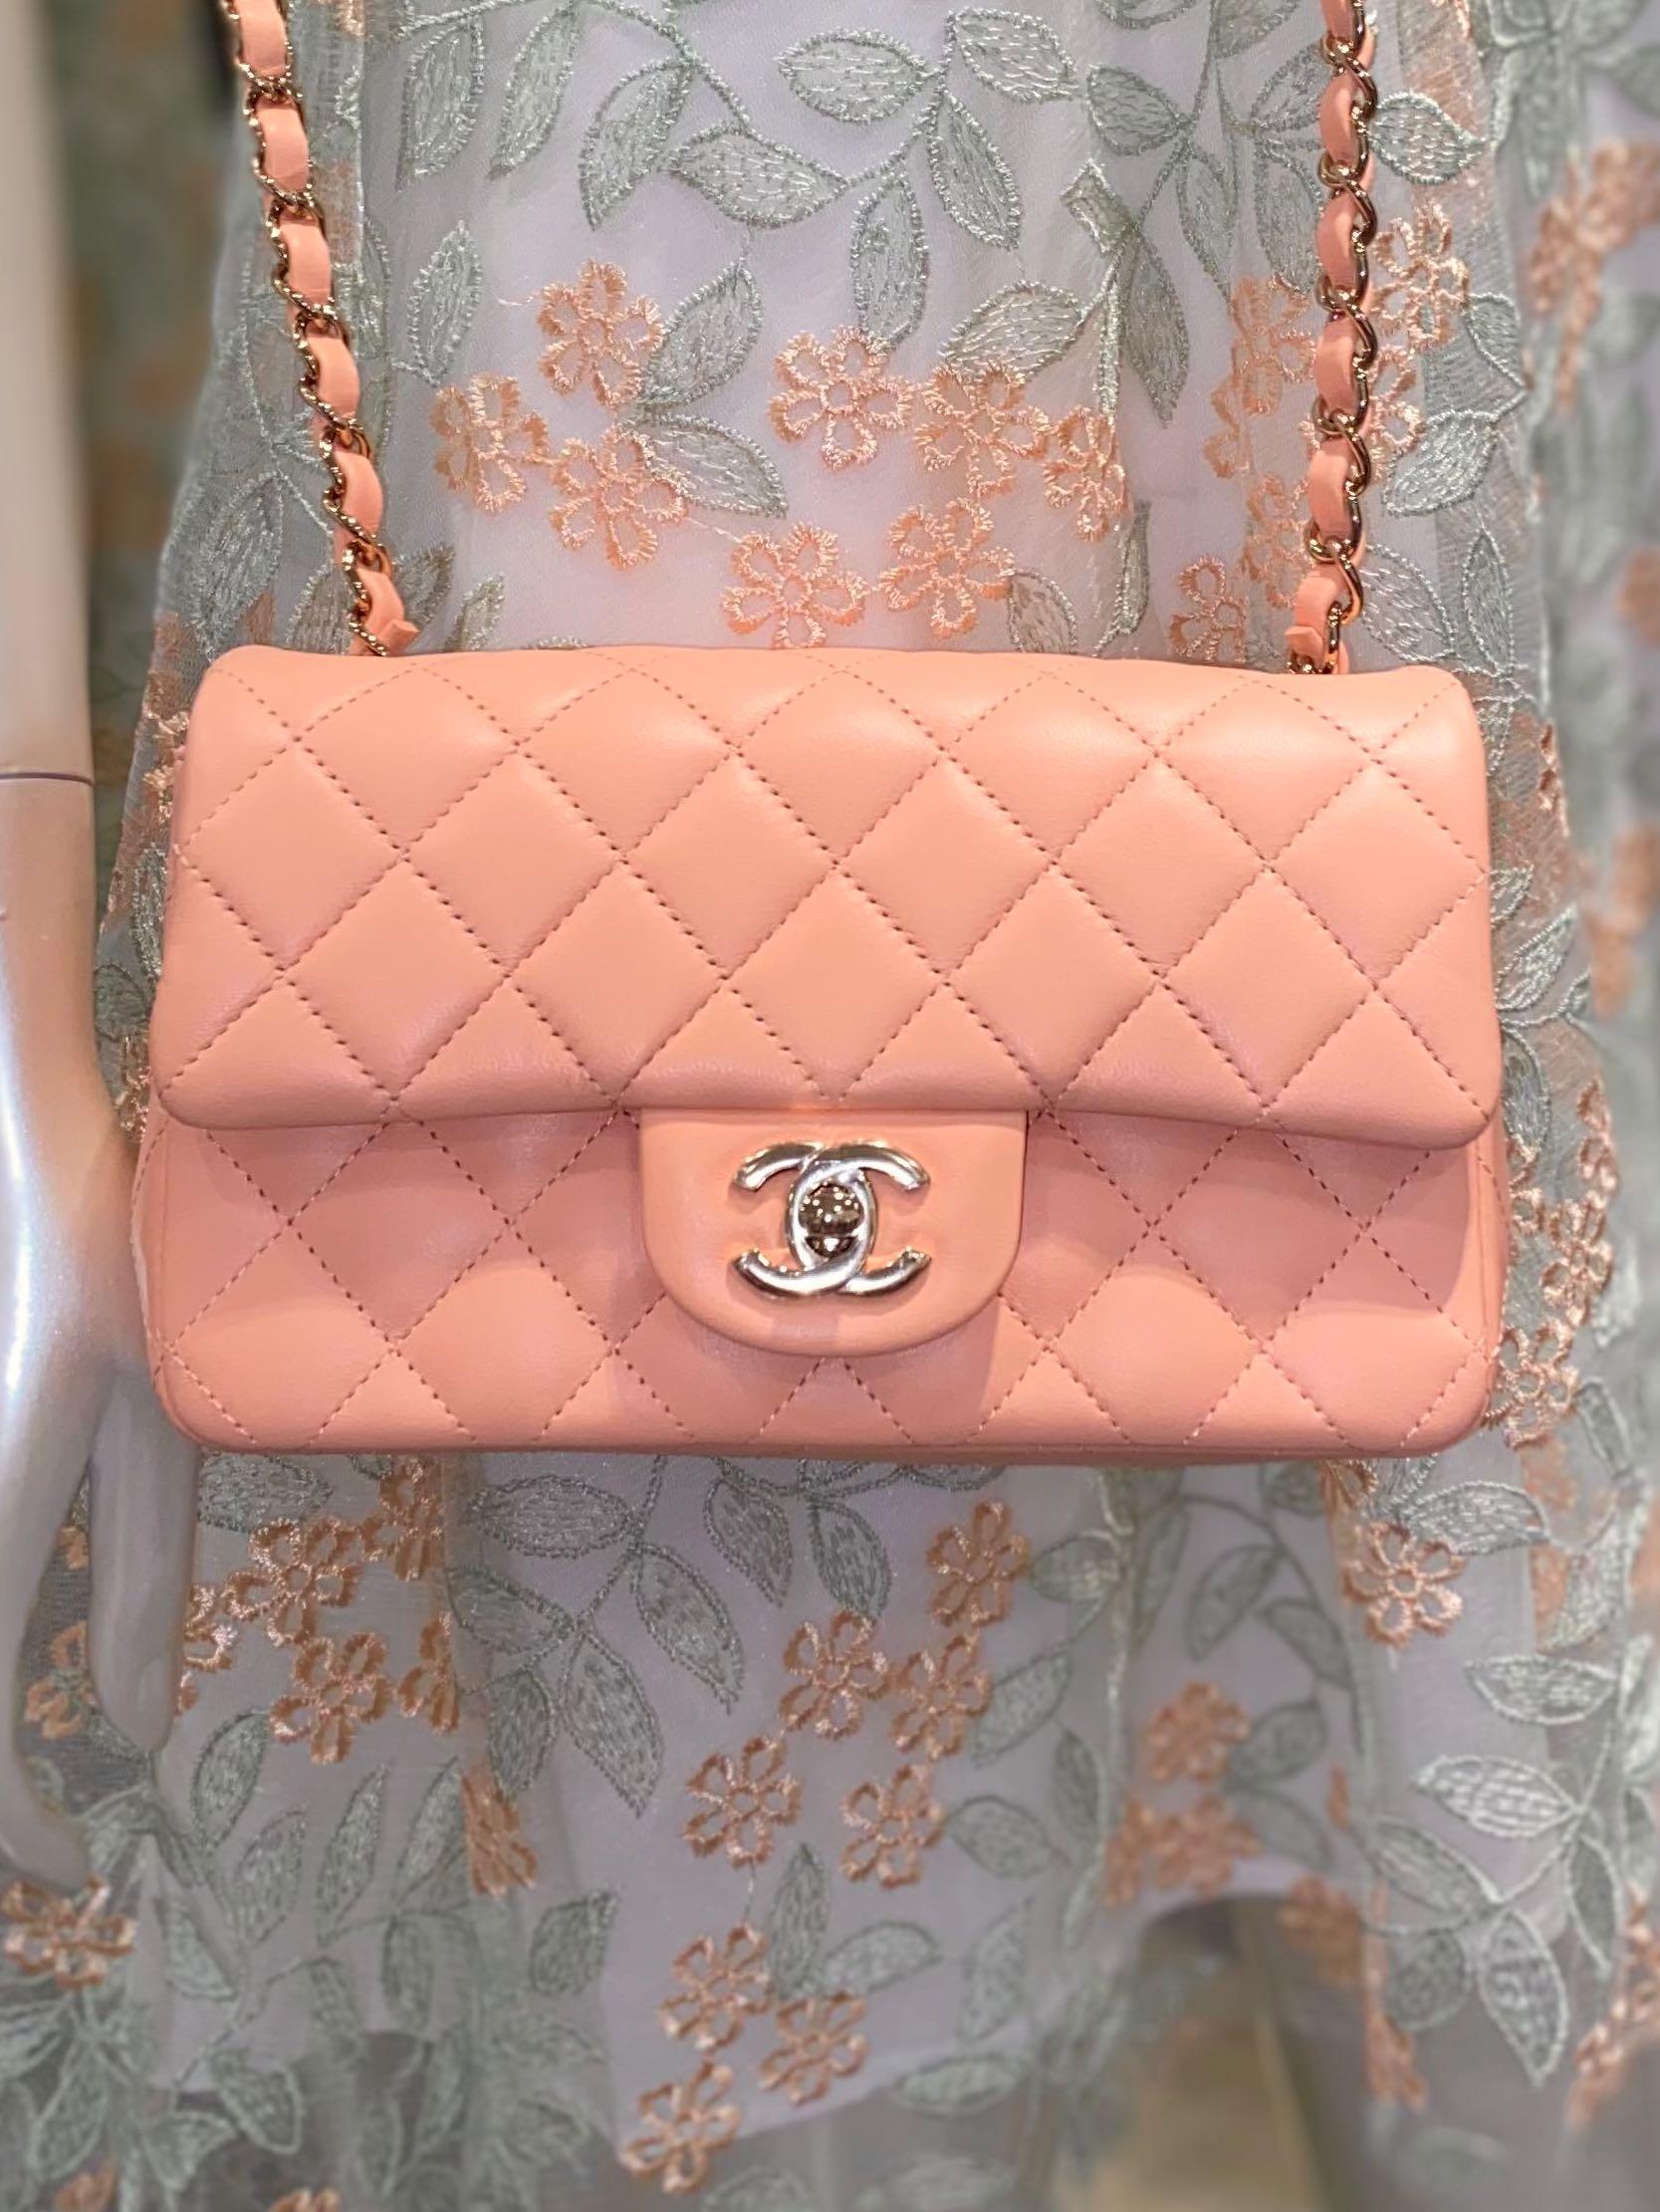 pink chanel bag with pearls